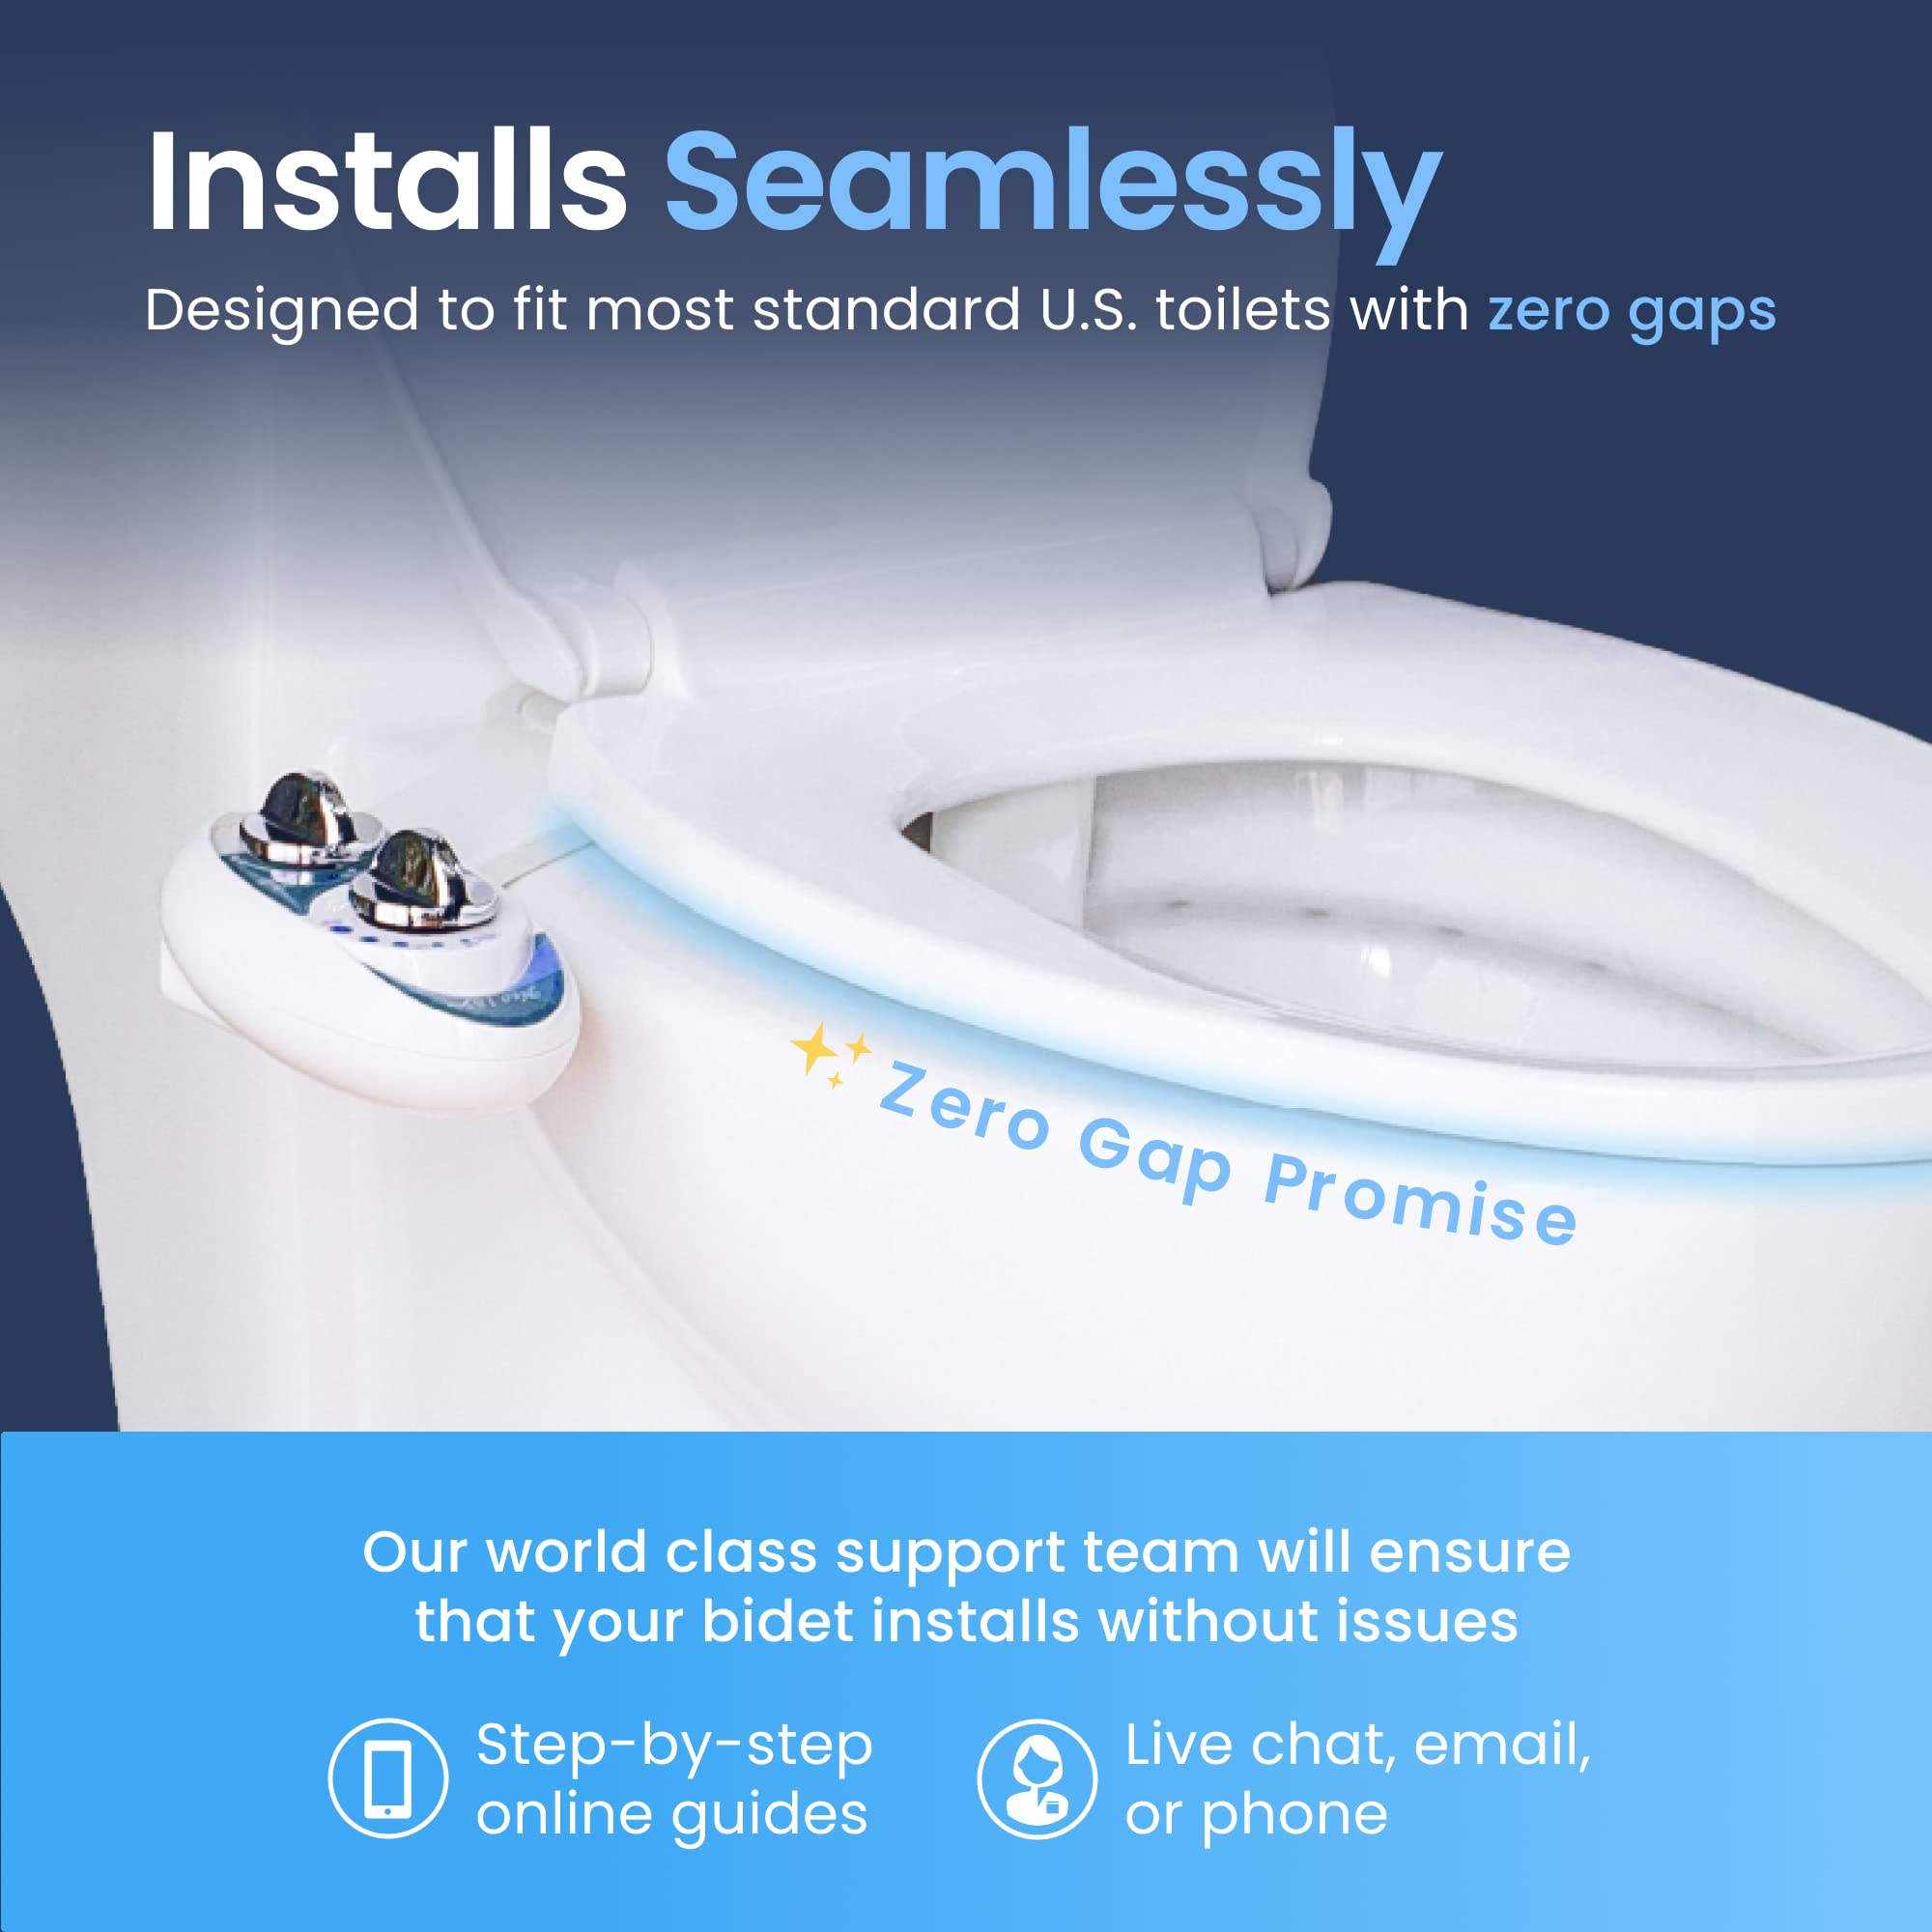 LUXE Bidet NEO 185 - Self-Cleaning, Dual Nozzle, Non-Electric Bidet Attachment for Toilet Seat, Adjustable Water Pressure, Rear and Feminine Wash (White)